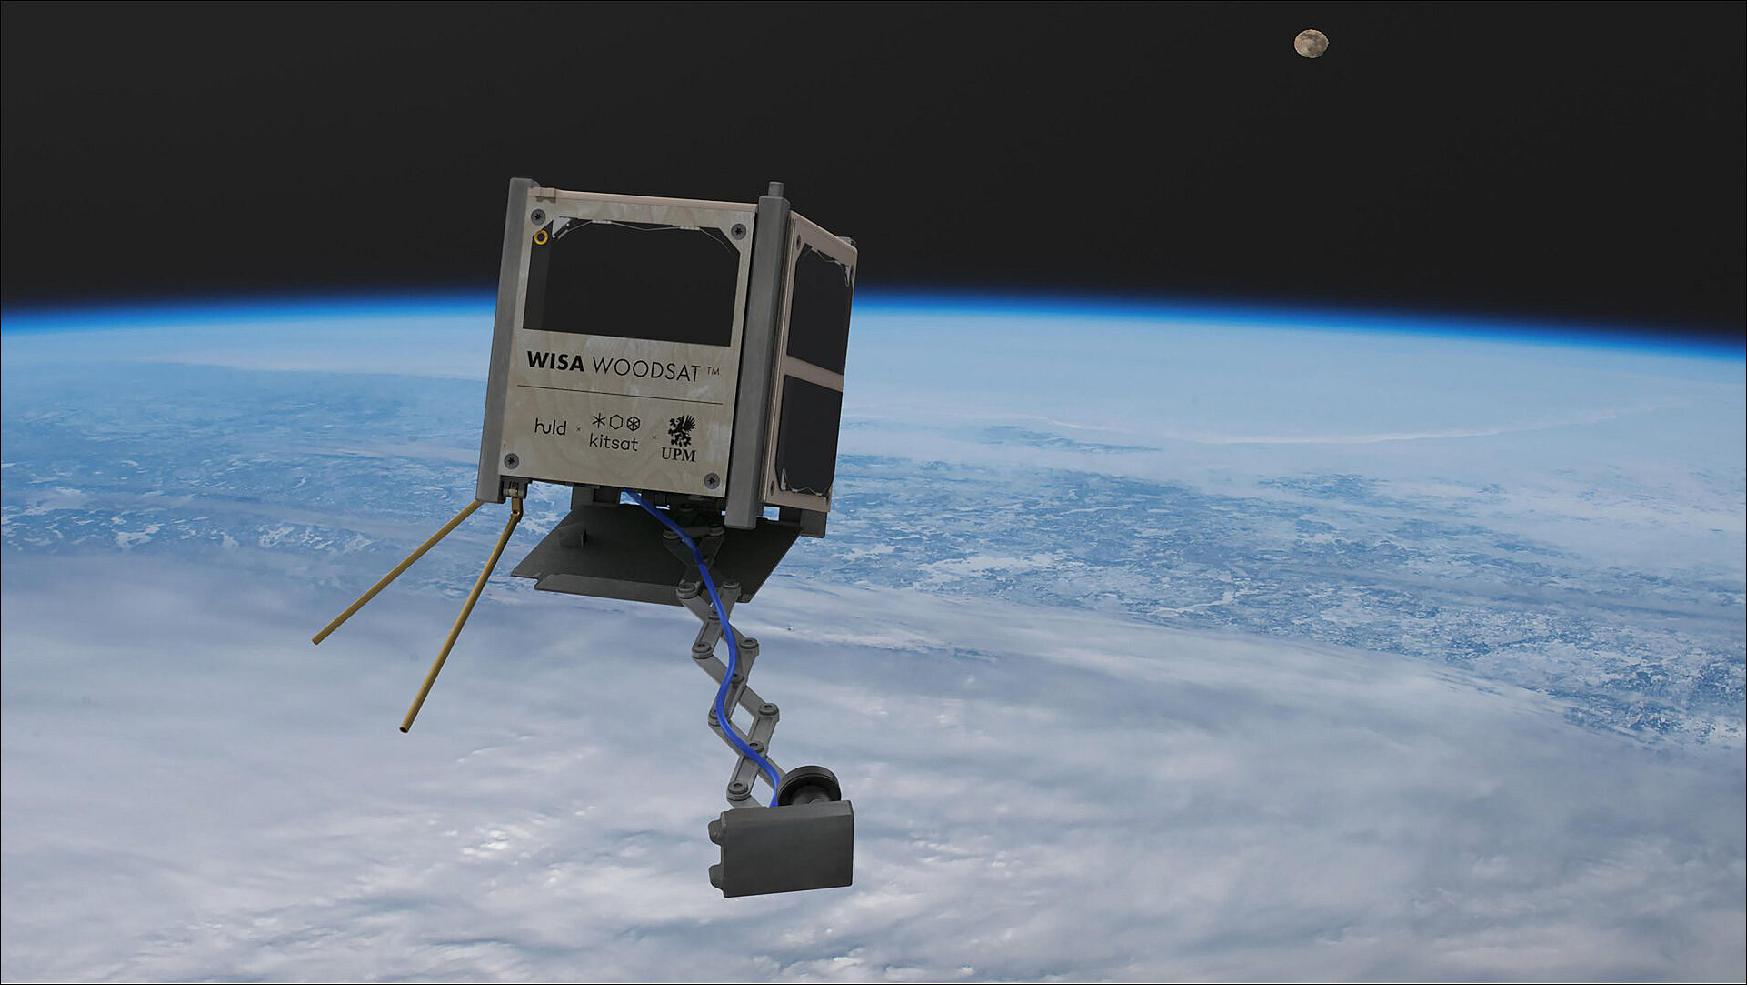 Figure 7: Woodsat in orbit. The world’s first wooden satellite is on the way, in the shape of the Finnish WISA Woodsat. The Wooden satellite with a selfie stick will surely bring goodwill and raise smiles, but essentially this is a serious science and technology endeavor. In addition to testing plywood, the satellite will demonstrate accessible radio amateur satellite communication, host several secondary technology experiments, validate theKitsat platform in orbit, and popularize space technology to the public. ESA materials experts are contributing a suite of experimental sensors to the mission as well as helping with pre-flight testing (image credit: Arctic Astronautics)